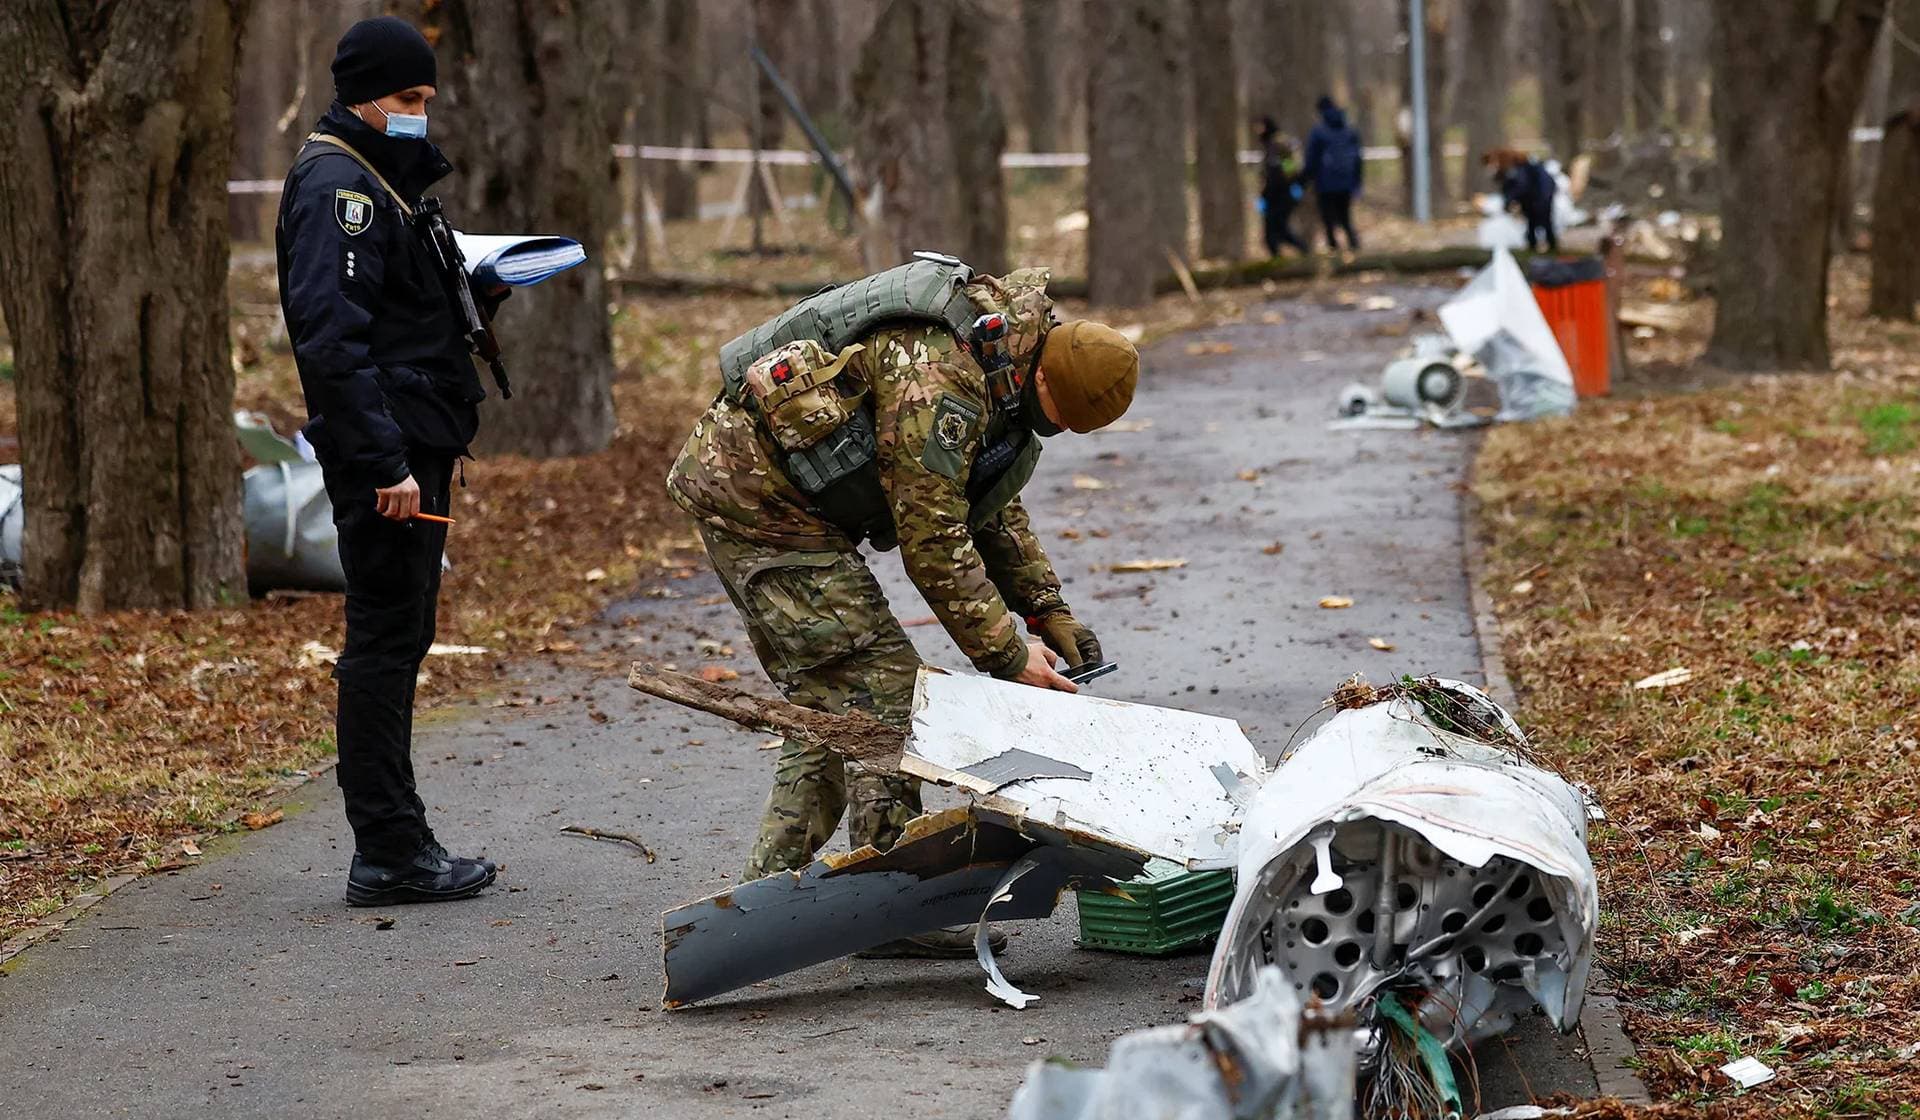 Police officers inspect a part of a Russian Kh-55 cruise missile intercepted during a missile strike in a park in Kyiv